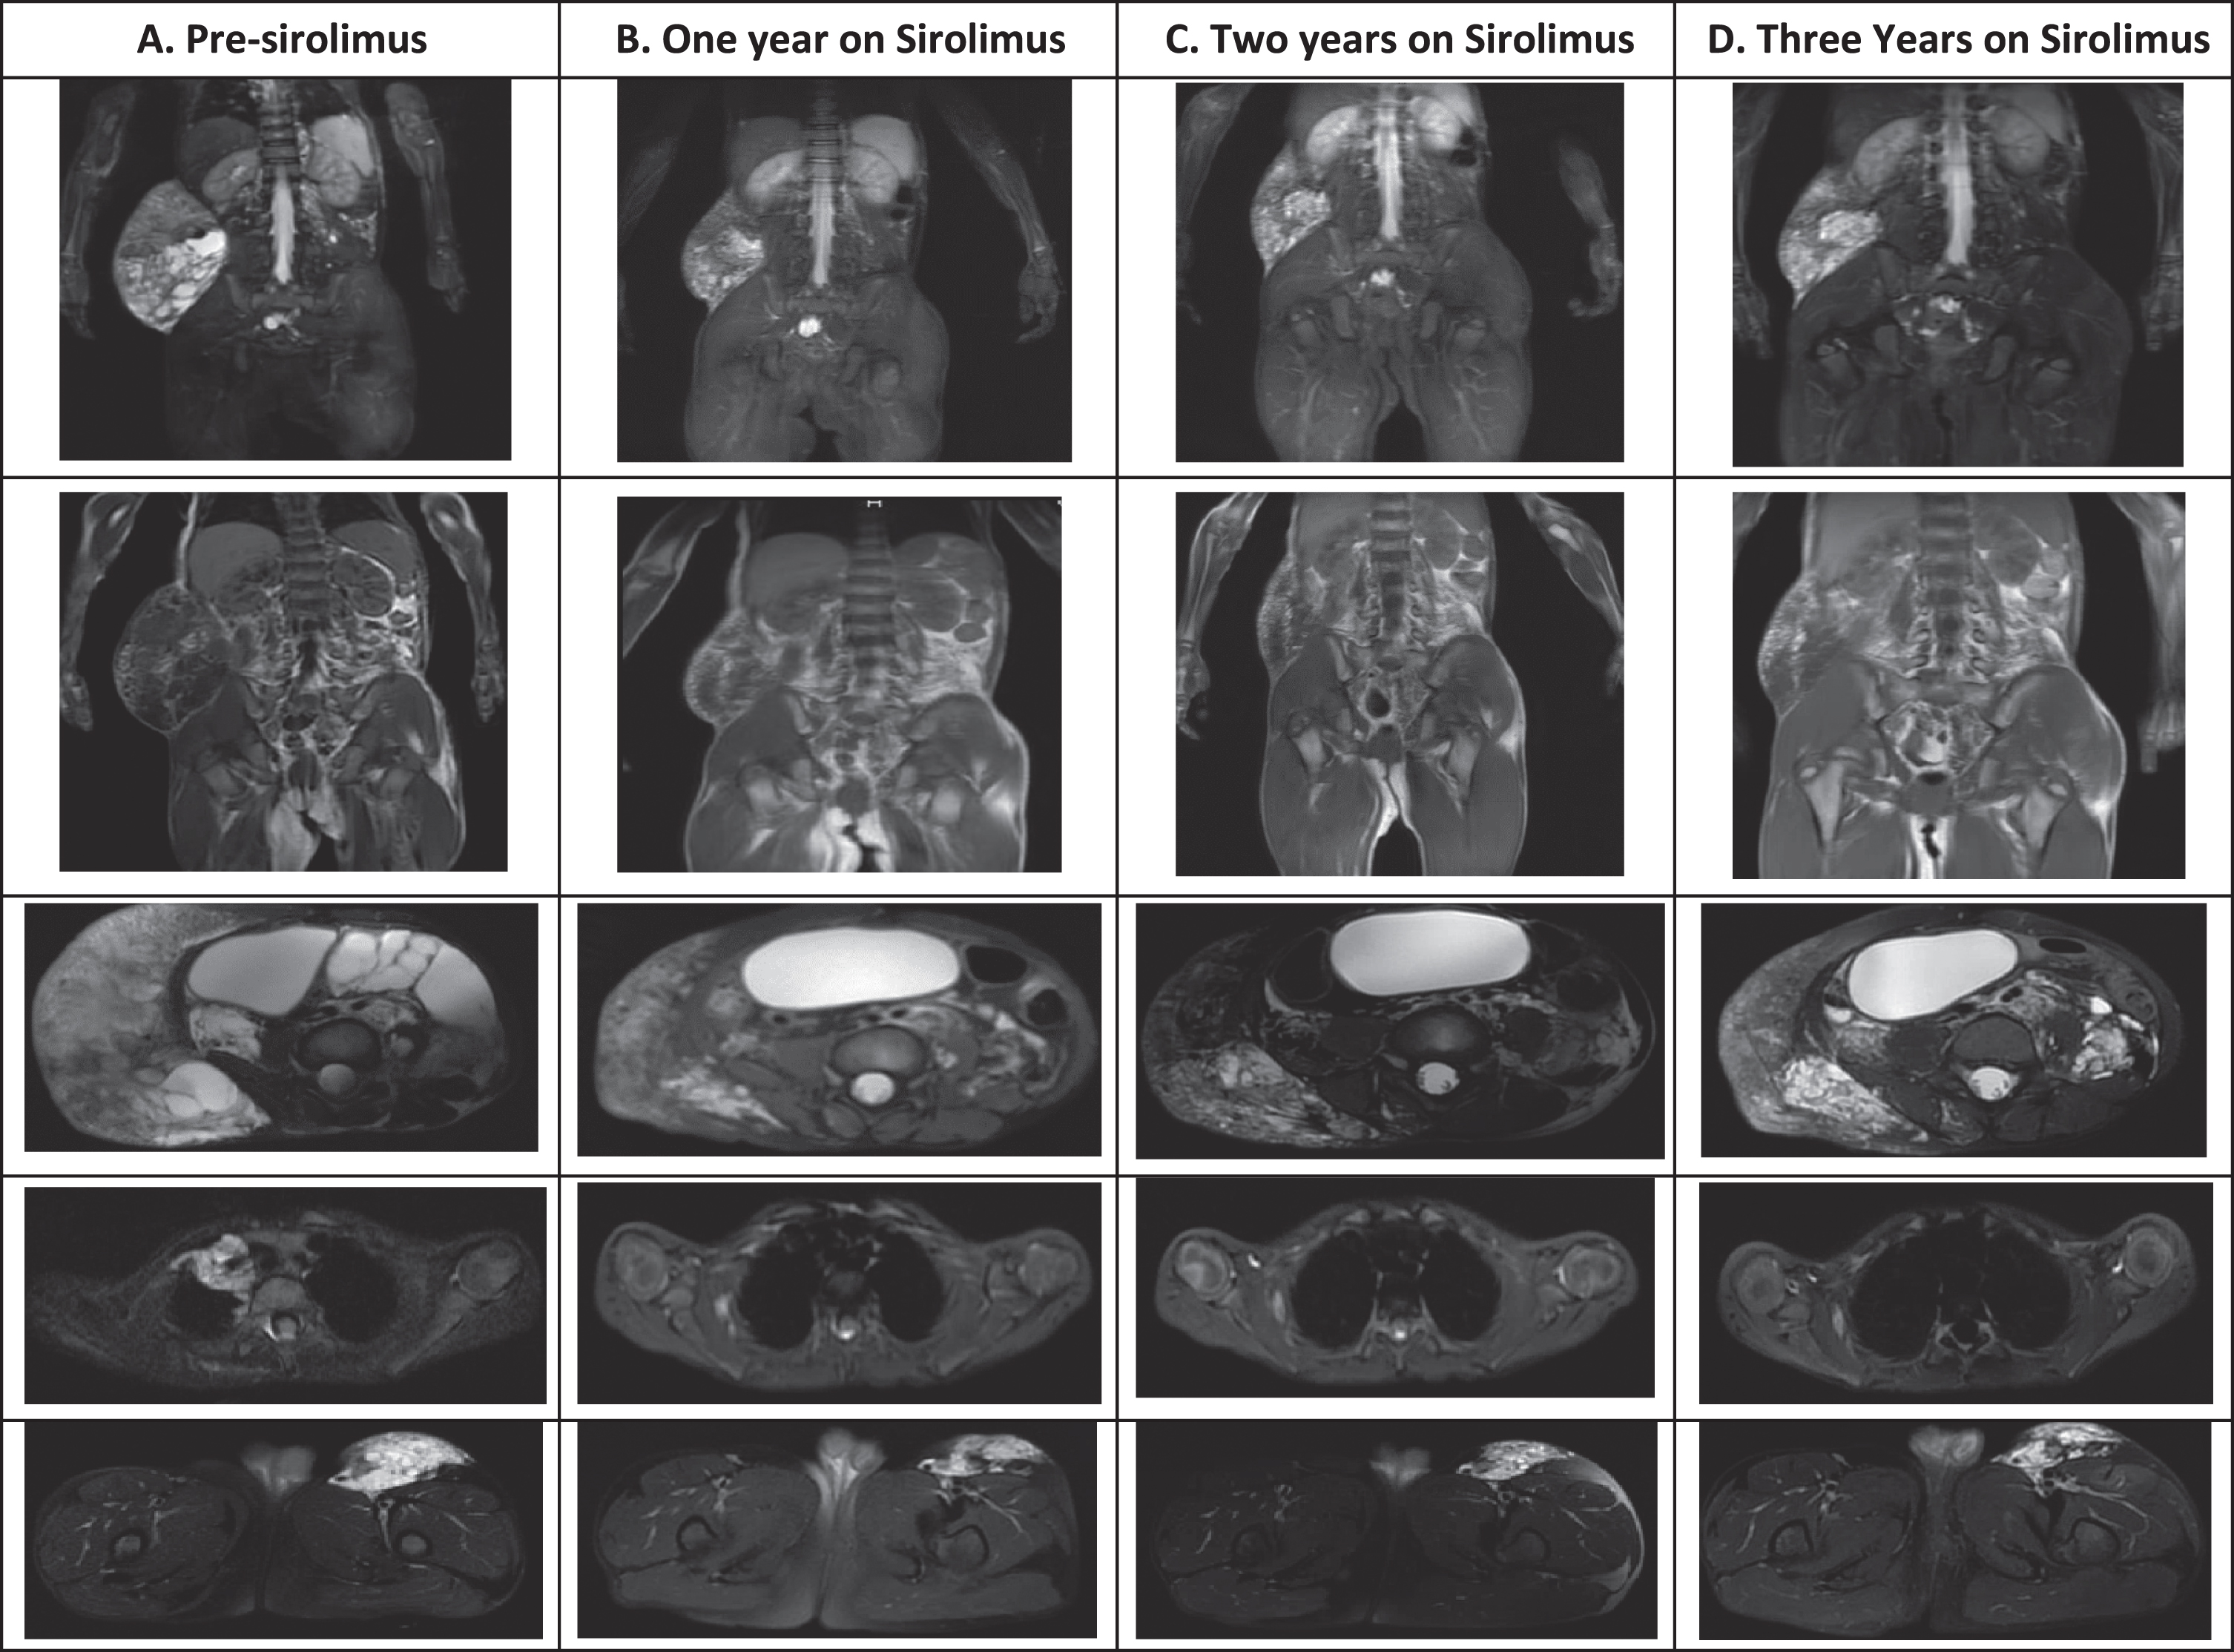 Radiographic changes before and after initiation of sirolimus therapy. Images from top to bottom were done with short TI inversion recovery (STIR), fat spin echo (FSE) T1, and T2 fat saturated imaging for the remaining images. A.) MRI prior to initiation of therapy demonstrated a 3.1×2.6×3.2 cm paratracheal, 5.6×15.4×13.4 cm exophytic right abdominal wall, and 9.4×6.7×3.2 cm anterior left thigh lymphatic malformations. There were multiple extensive and cystic lymphatic malformations throughout the abdomen and pelvis with extension through a defect within the left anterior pelvic wall to the left thigh, bilateral renal pelviectasis, and marked bladder extension and mass effect on the bowel secondary to the large lymphatic malformation. Age 3 years. B). Repeat MRI within one year on sirolimus therapy was no longer able to visualize the paratracheal mass, the exophytic mass decreased to 5×10.4×12.8 cm, the left thigh mass decreased to 5.4×2.1×2.4 cm, there was marked overall decrease in the cystic components, and the kidneys were normal in size and contour. Age 4 years. C-D. MRI two and three years on sirolimus therapy was stable. Age 5-6 years.